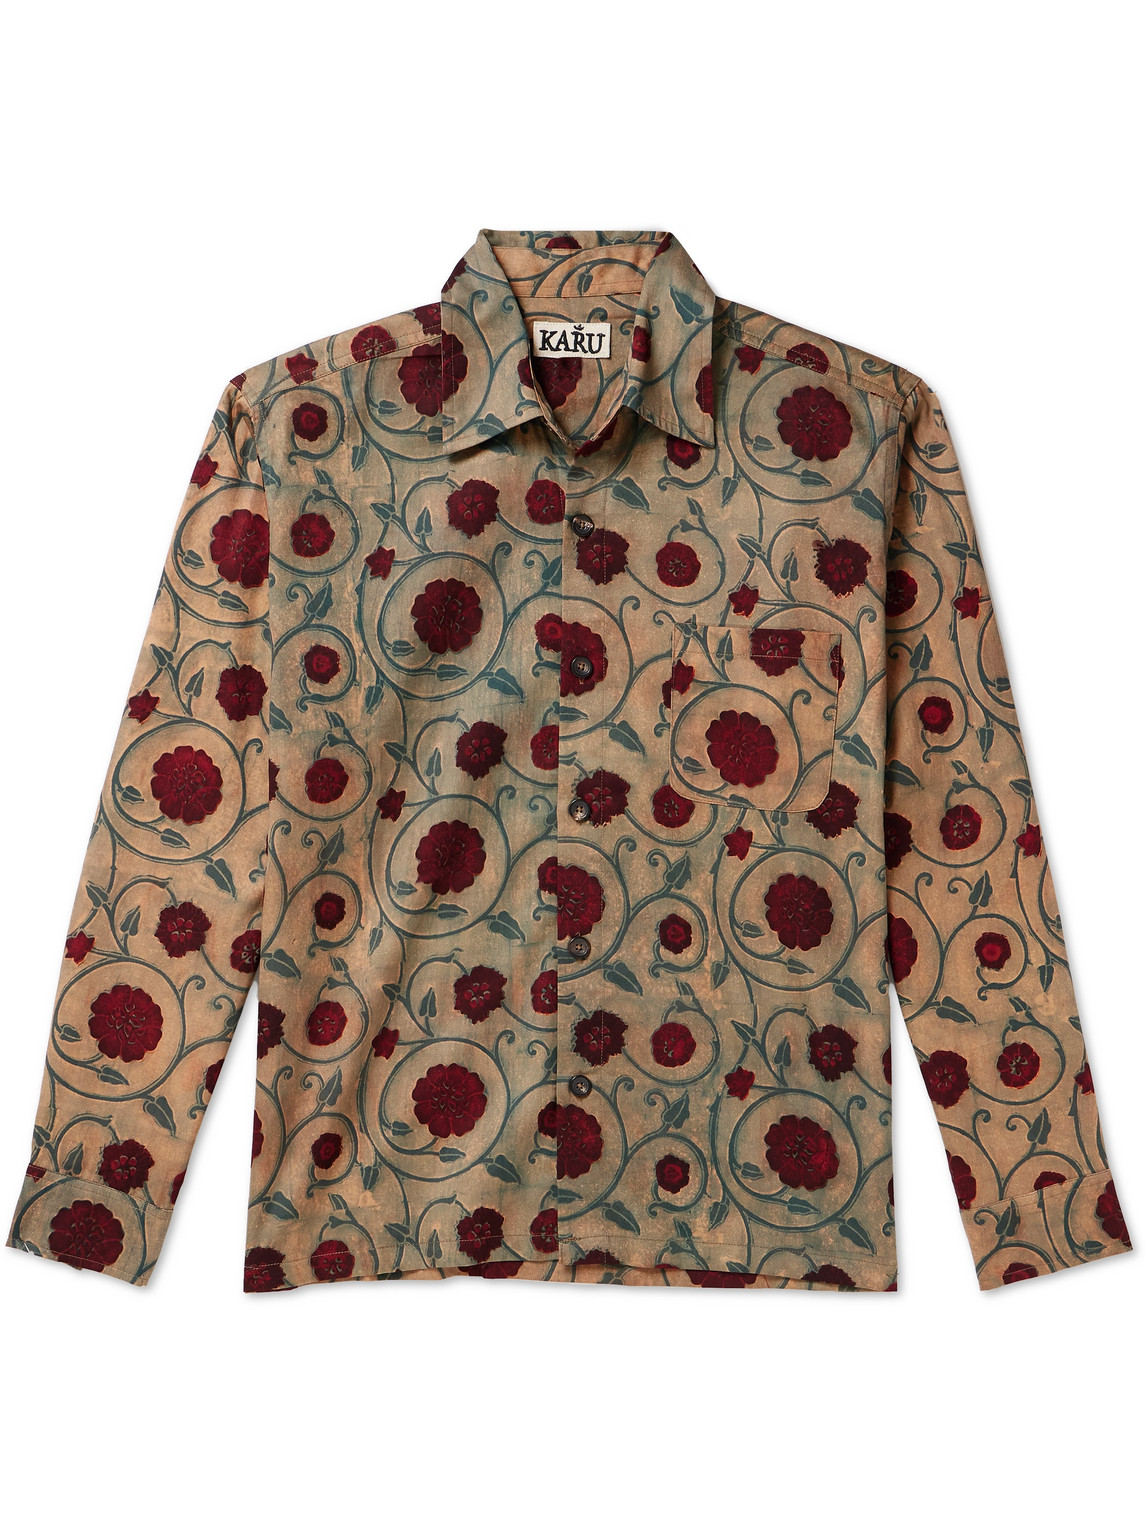 Karu Research Throwing Fits Printed Cotton Shirt In Neutrals